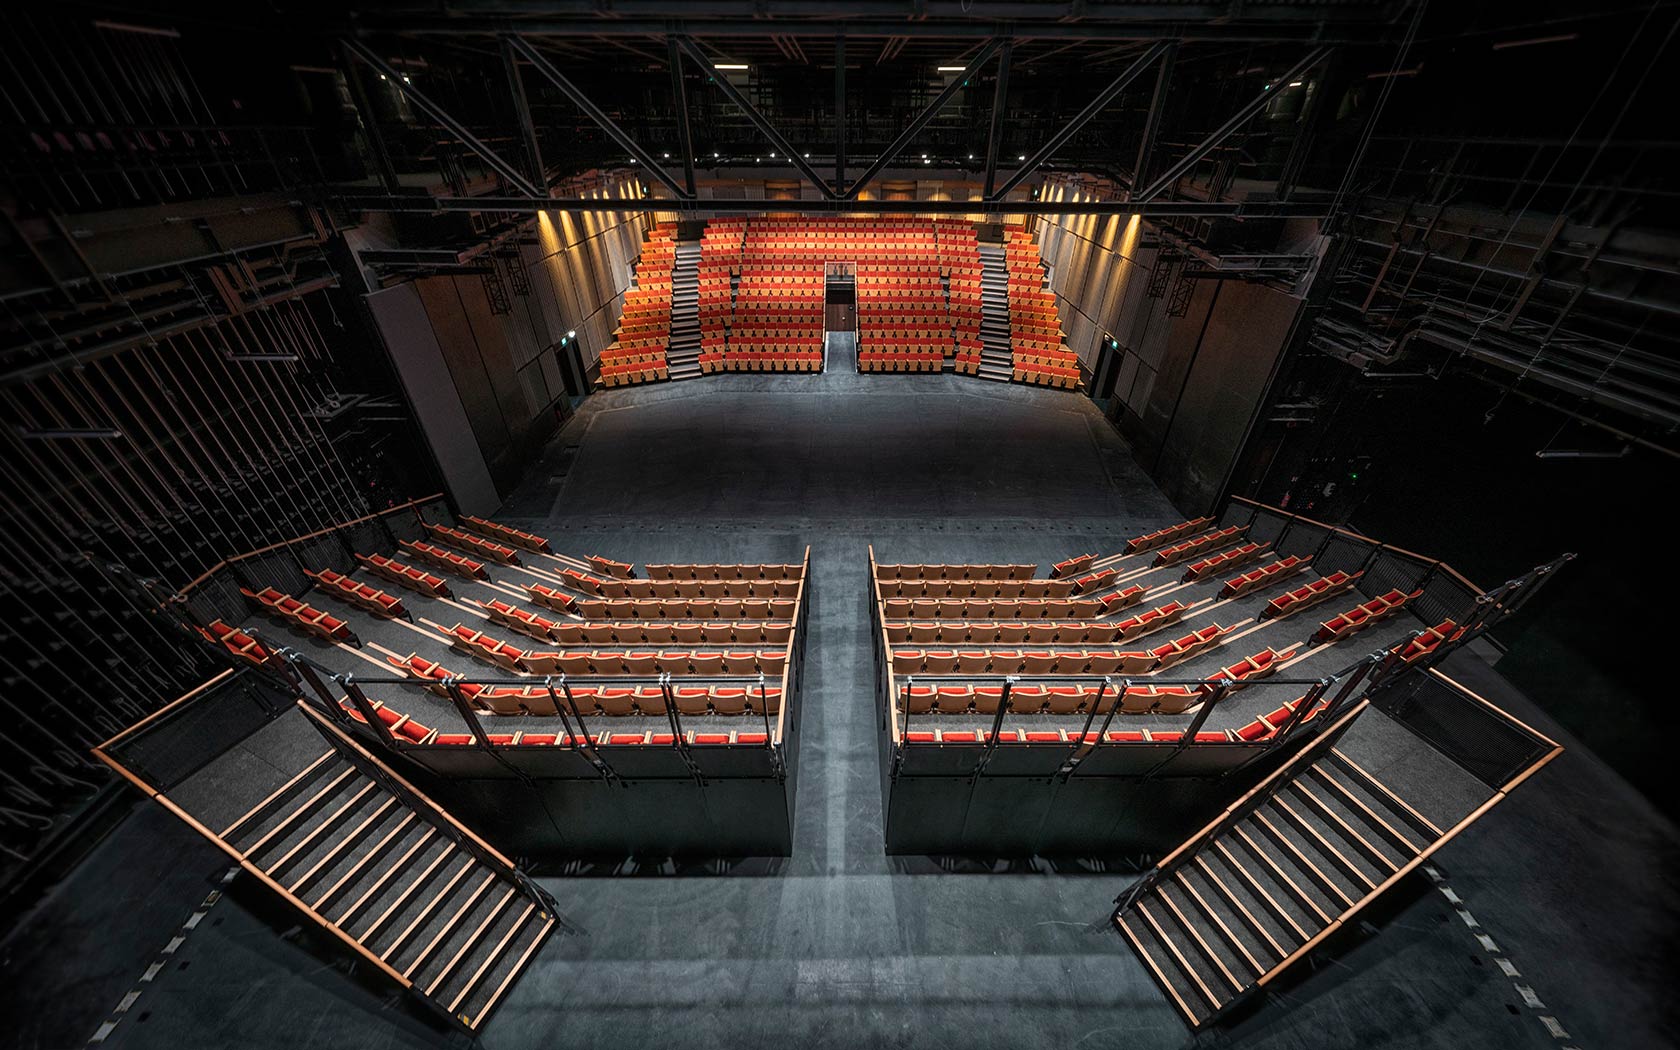 Image of the interior of the Singtel Waterfront Theatre with seats configured in traverse.